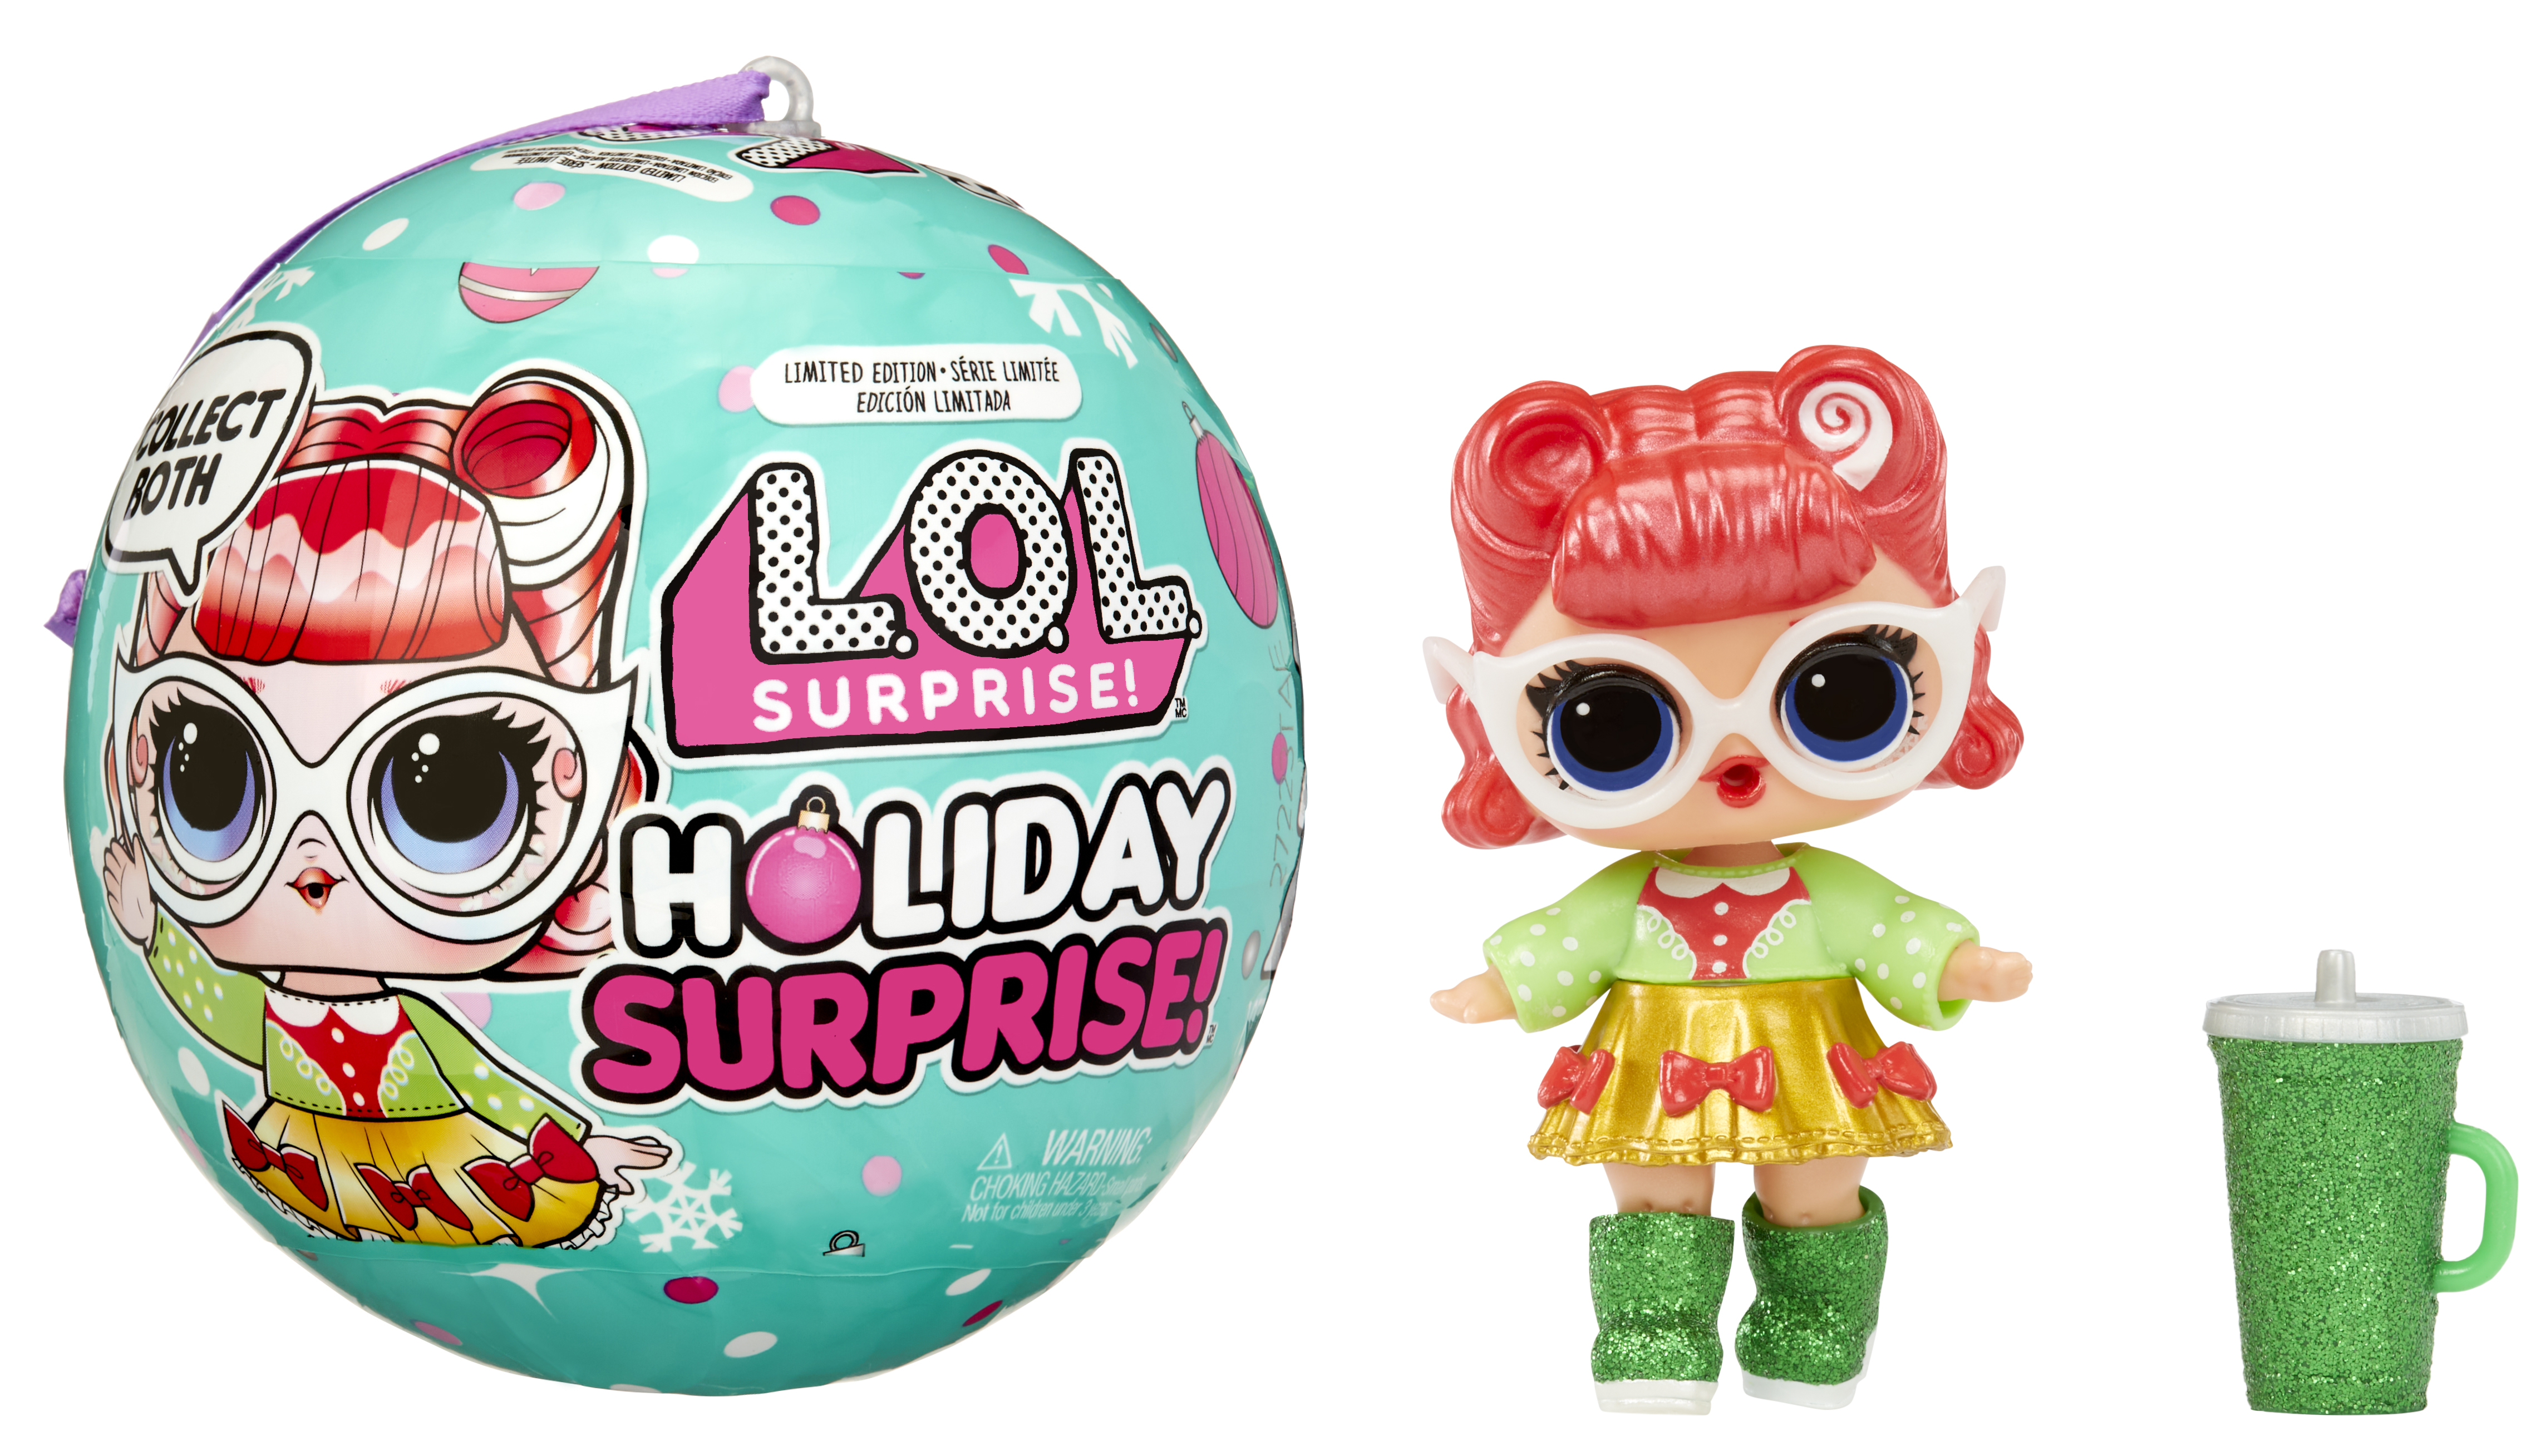 Miniverse Holiday-Themed – L.O.L. Surprise